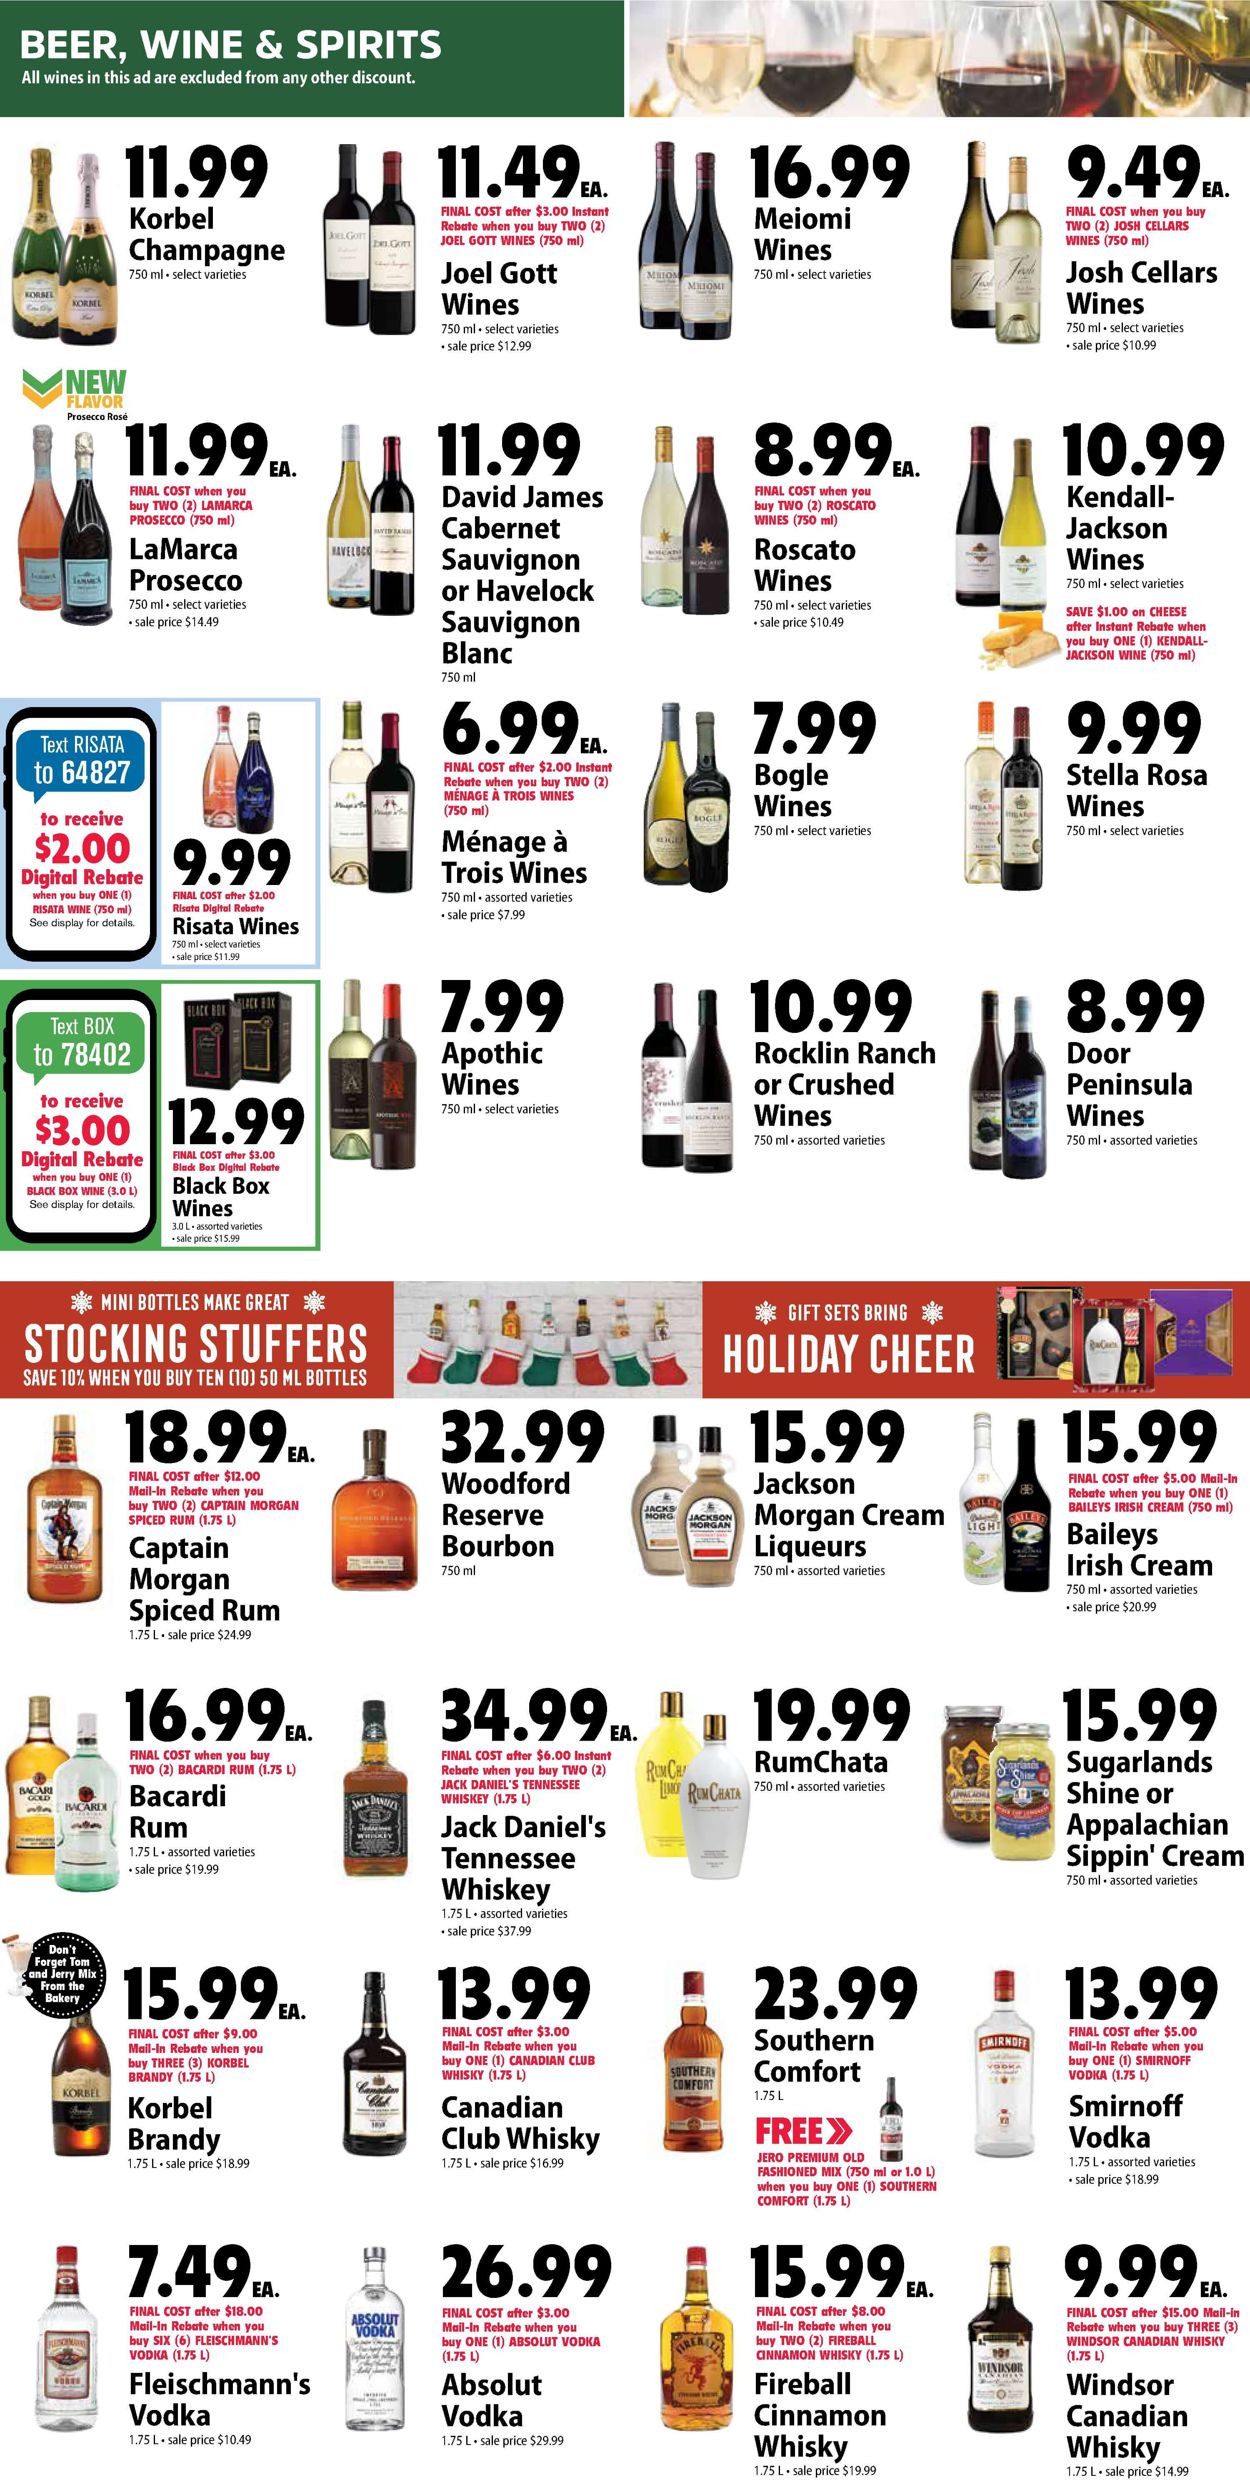 Festival Foods CHRISTMAS 2021 Weekly Ad Circular - valid 12/15-12/21/2021 (Page 6)